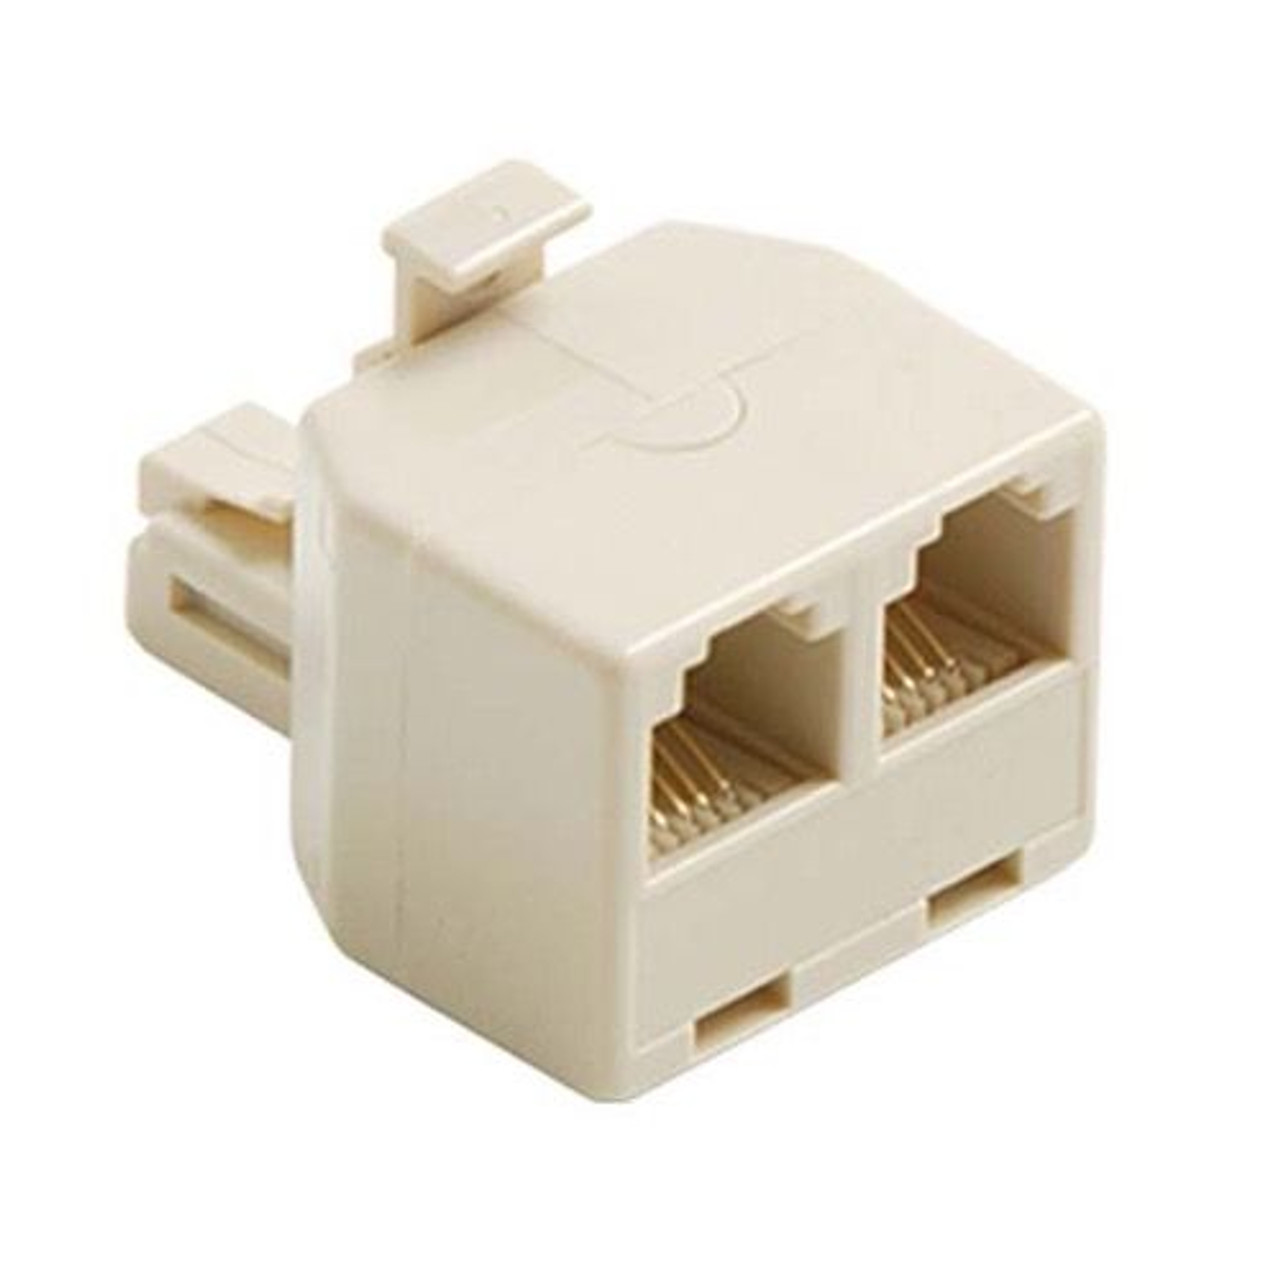 Eagle 2 Way Wall Modular 6 Wire Phone Conductor Adapter RJ12 Ivory Dual T Splitter Line RJ-12 2 Outlet Telephone Plug Jack Duplex 6P6C, Part # C0267W